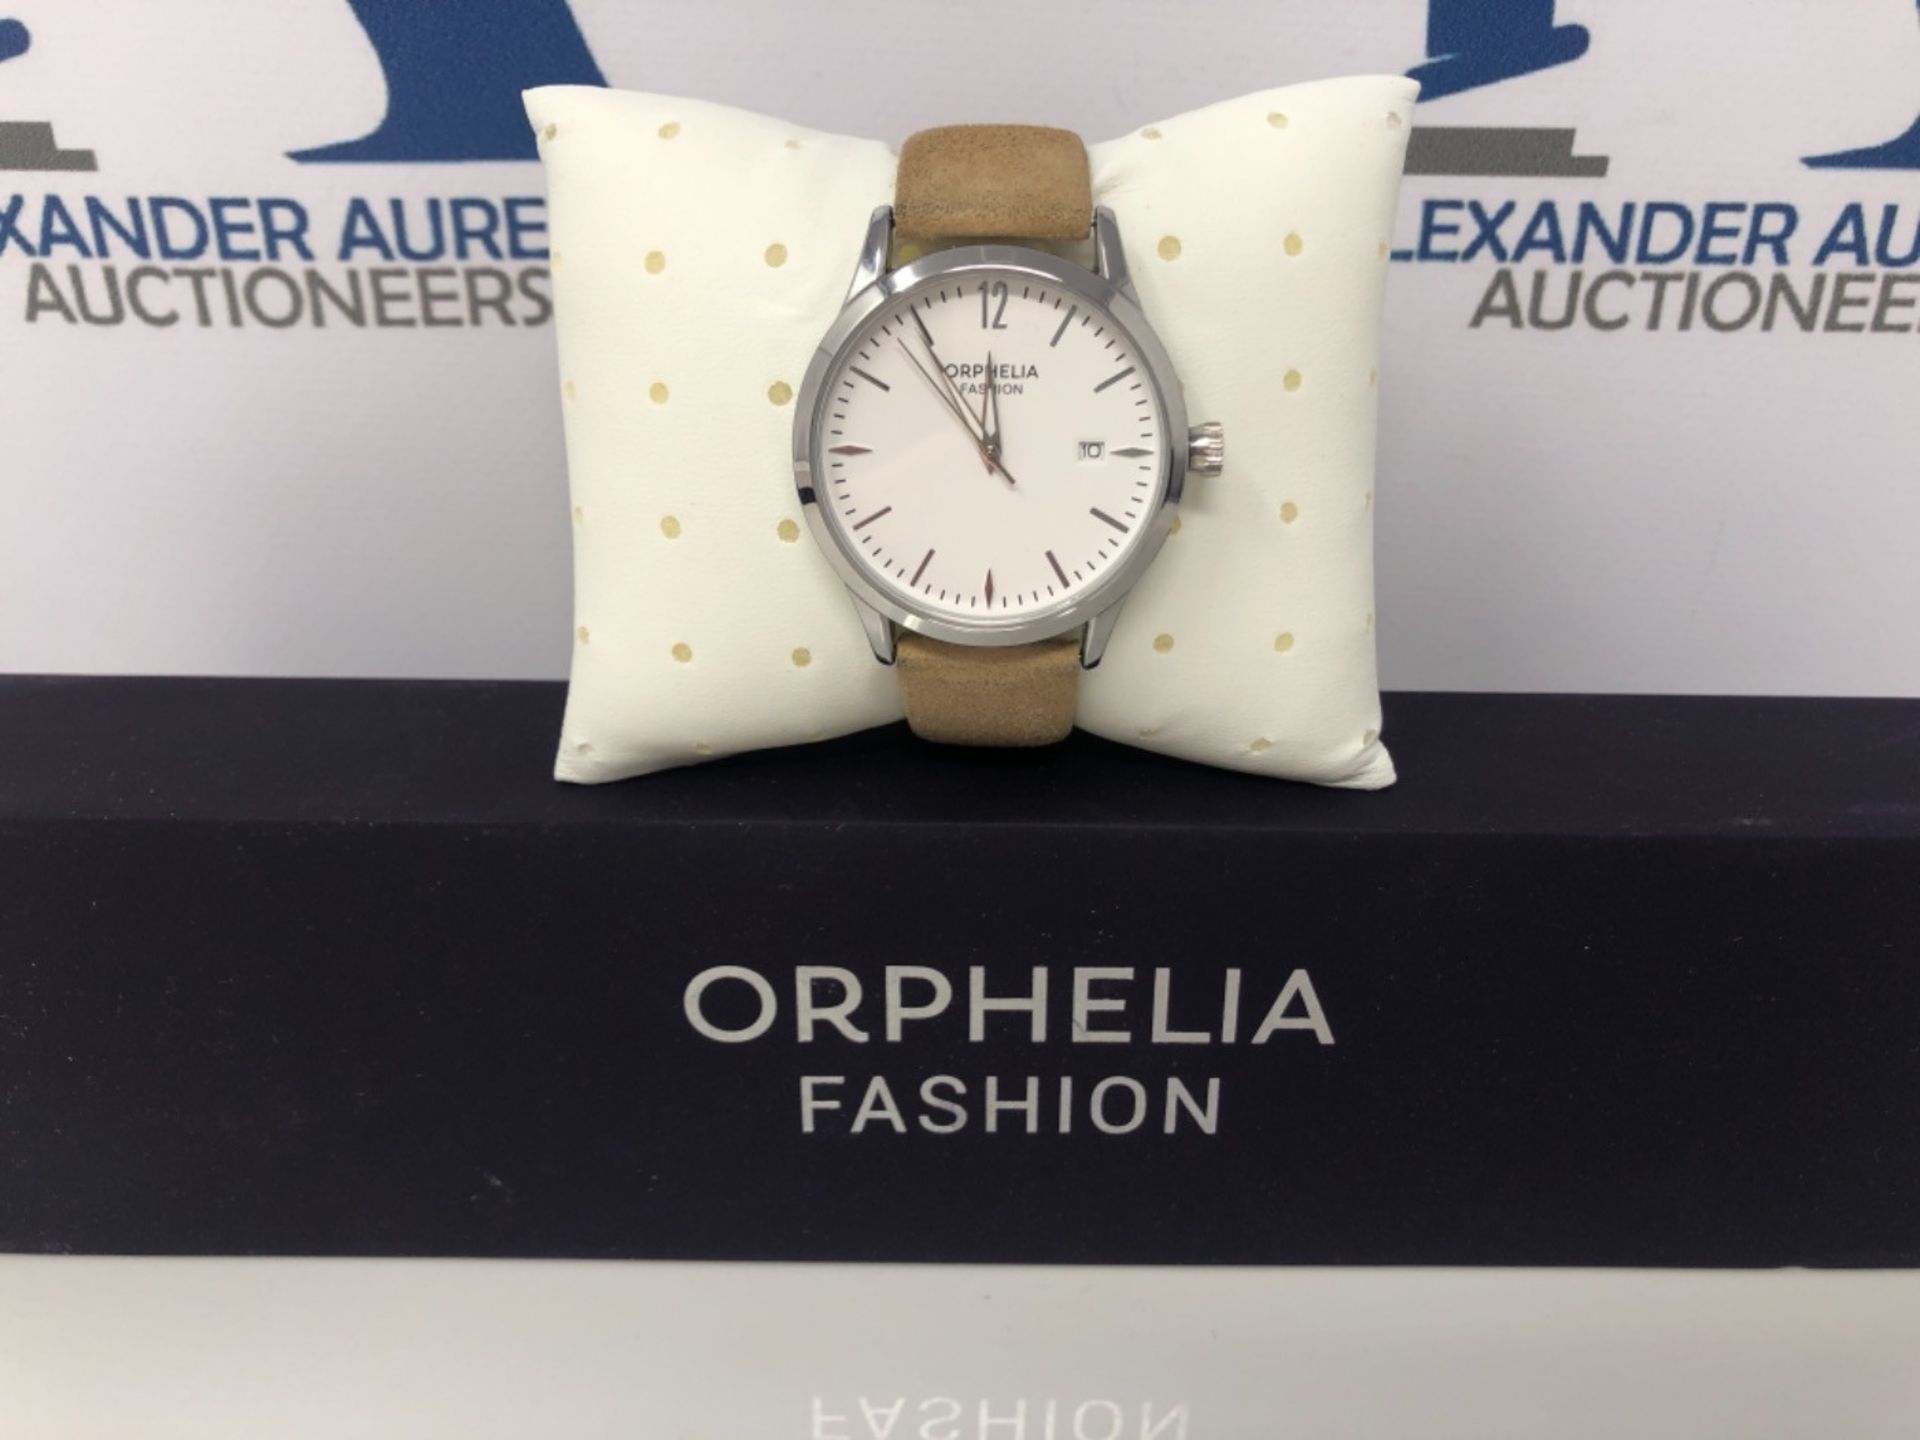 Orphelia Women's Analogue Quartz Watch with Leather Strap OF711819 - Image 2 of 3